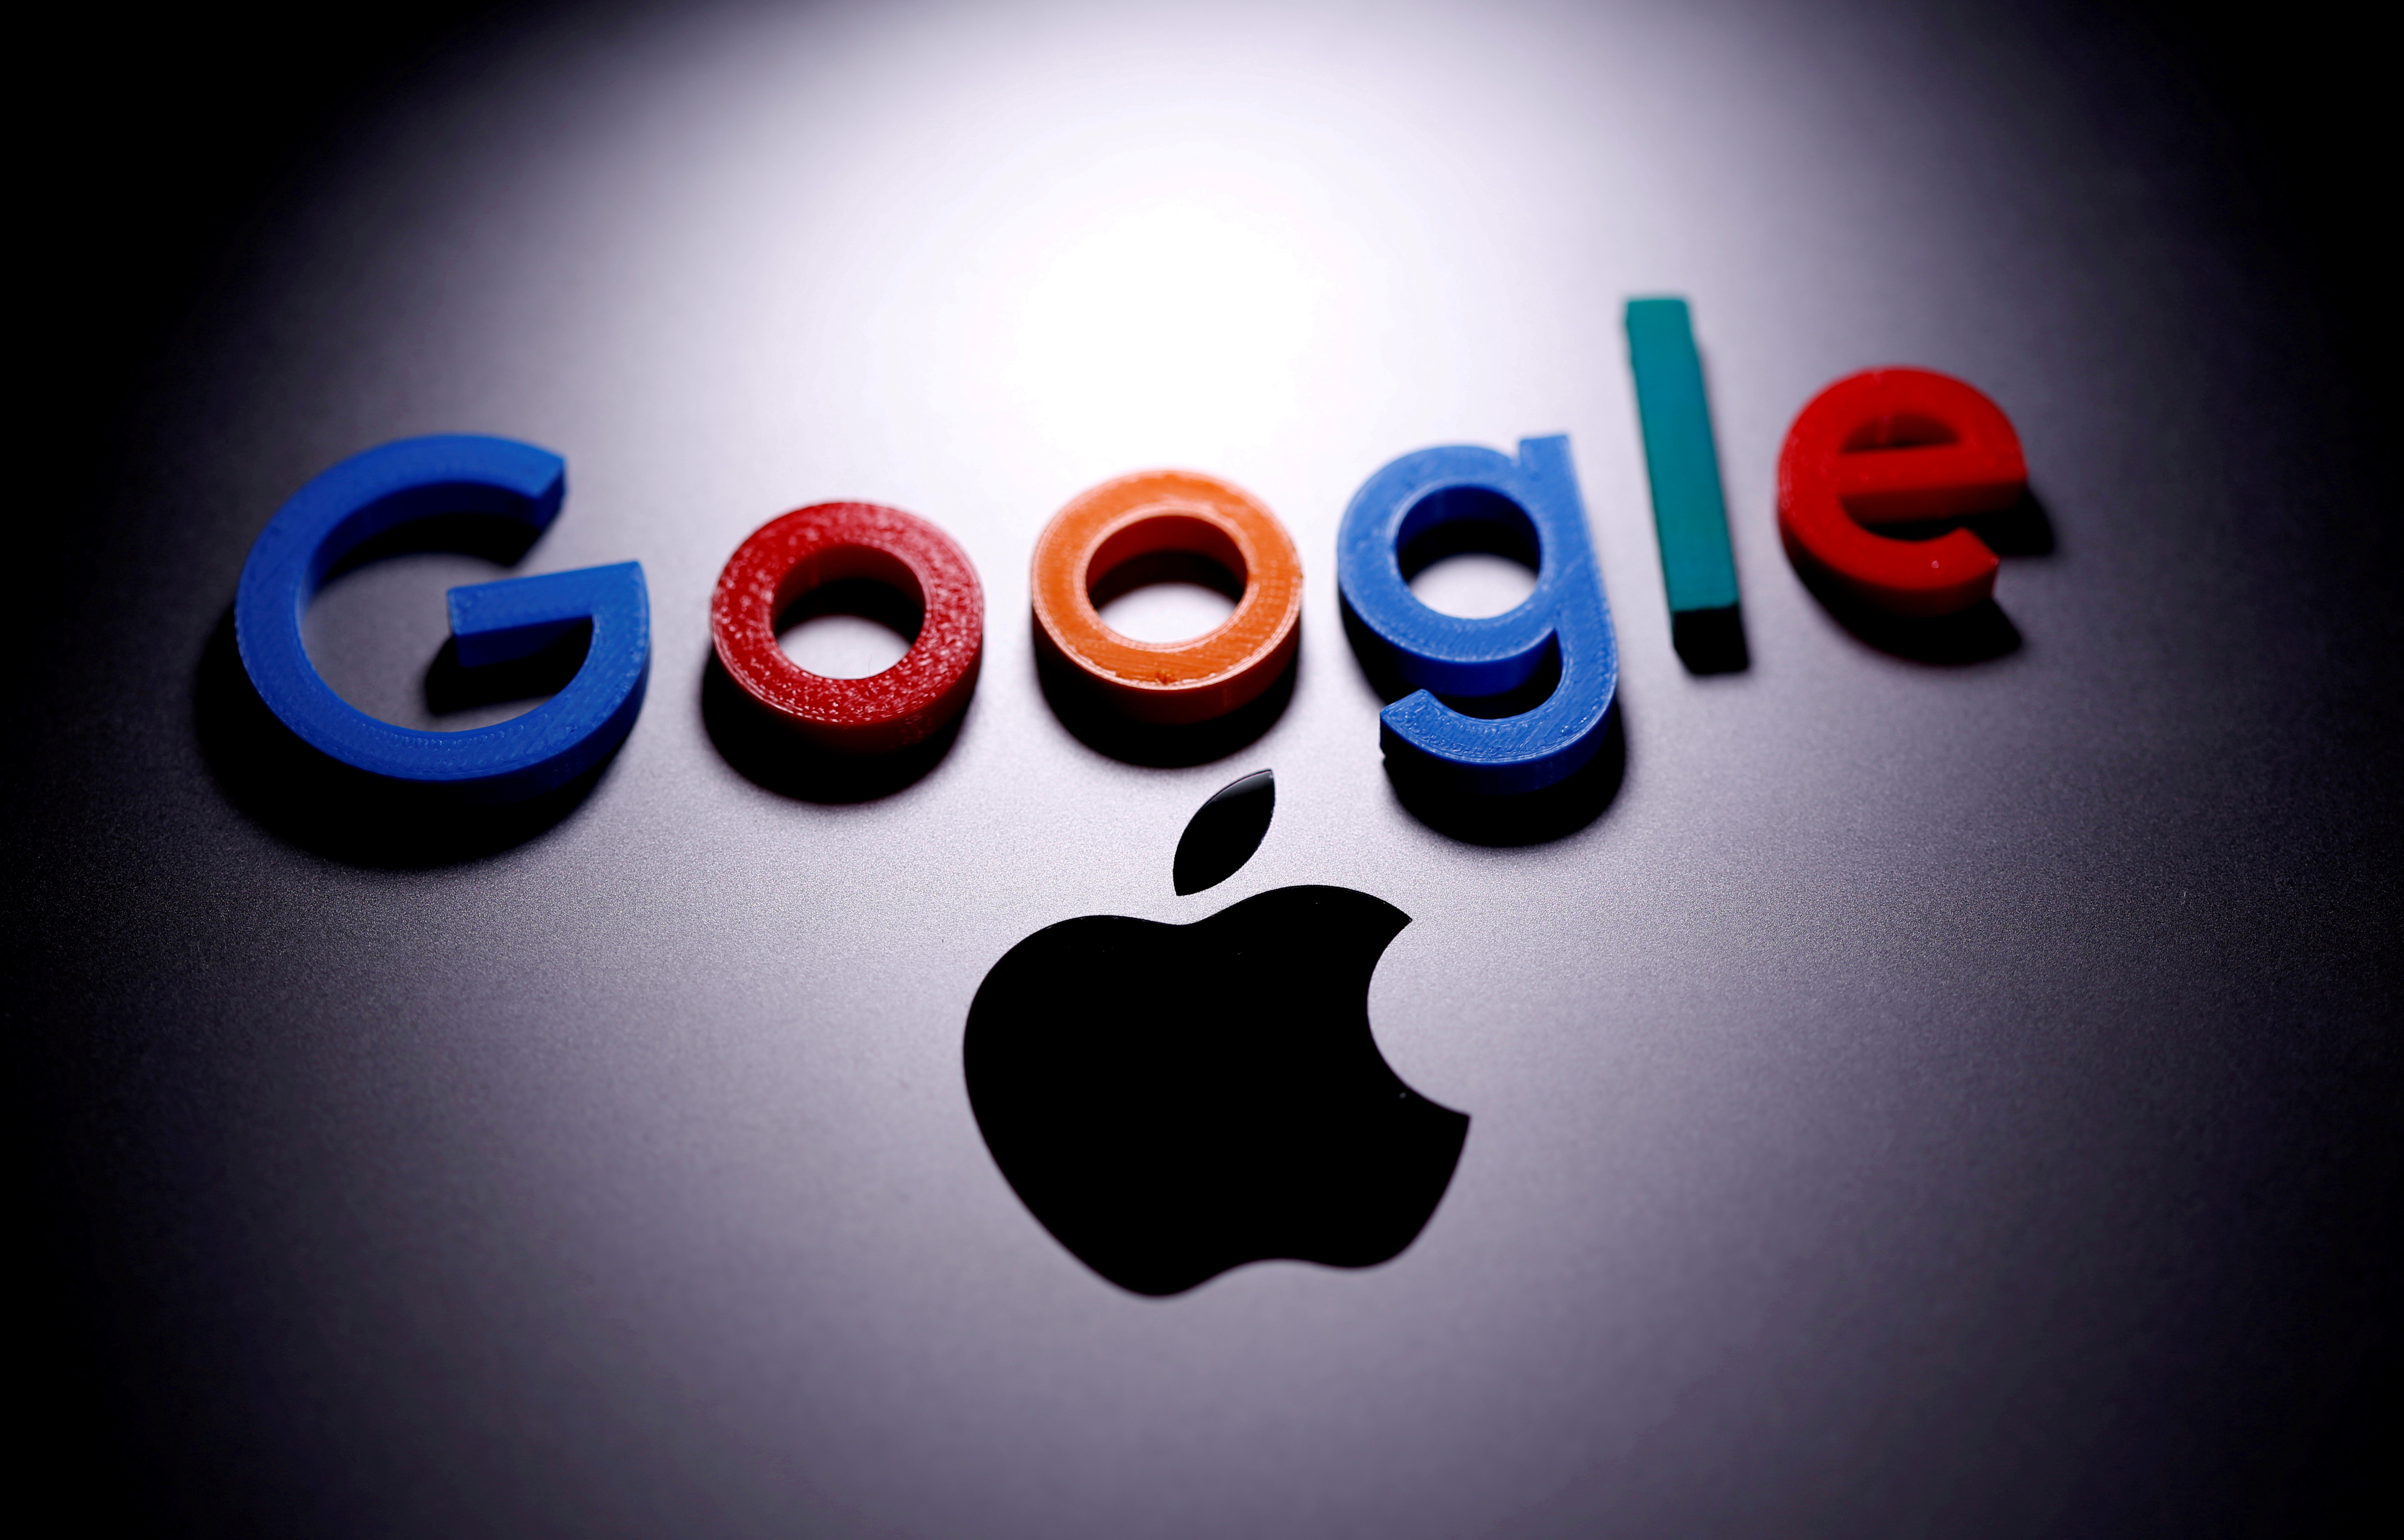  A 3D printed Google logo is placed on the Apple Macbook in this illustration taken April 12, 2020. REUTERS/Dado Ruvic/Illustration/File Photo